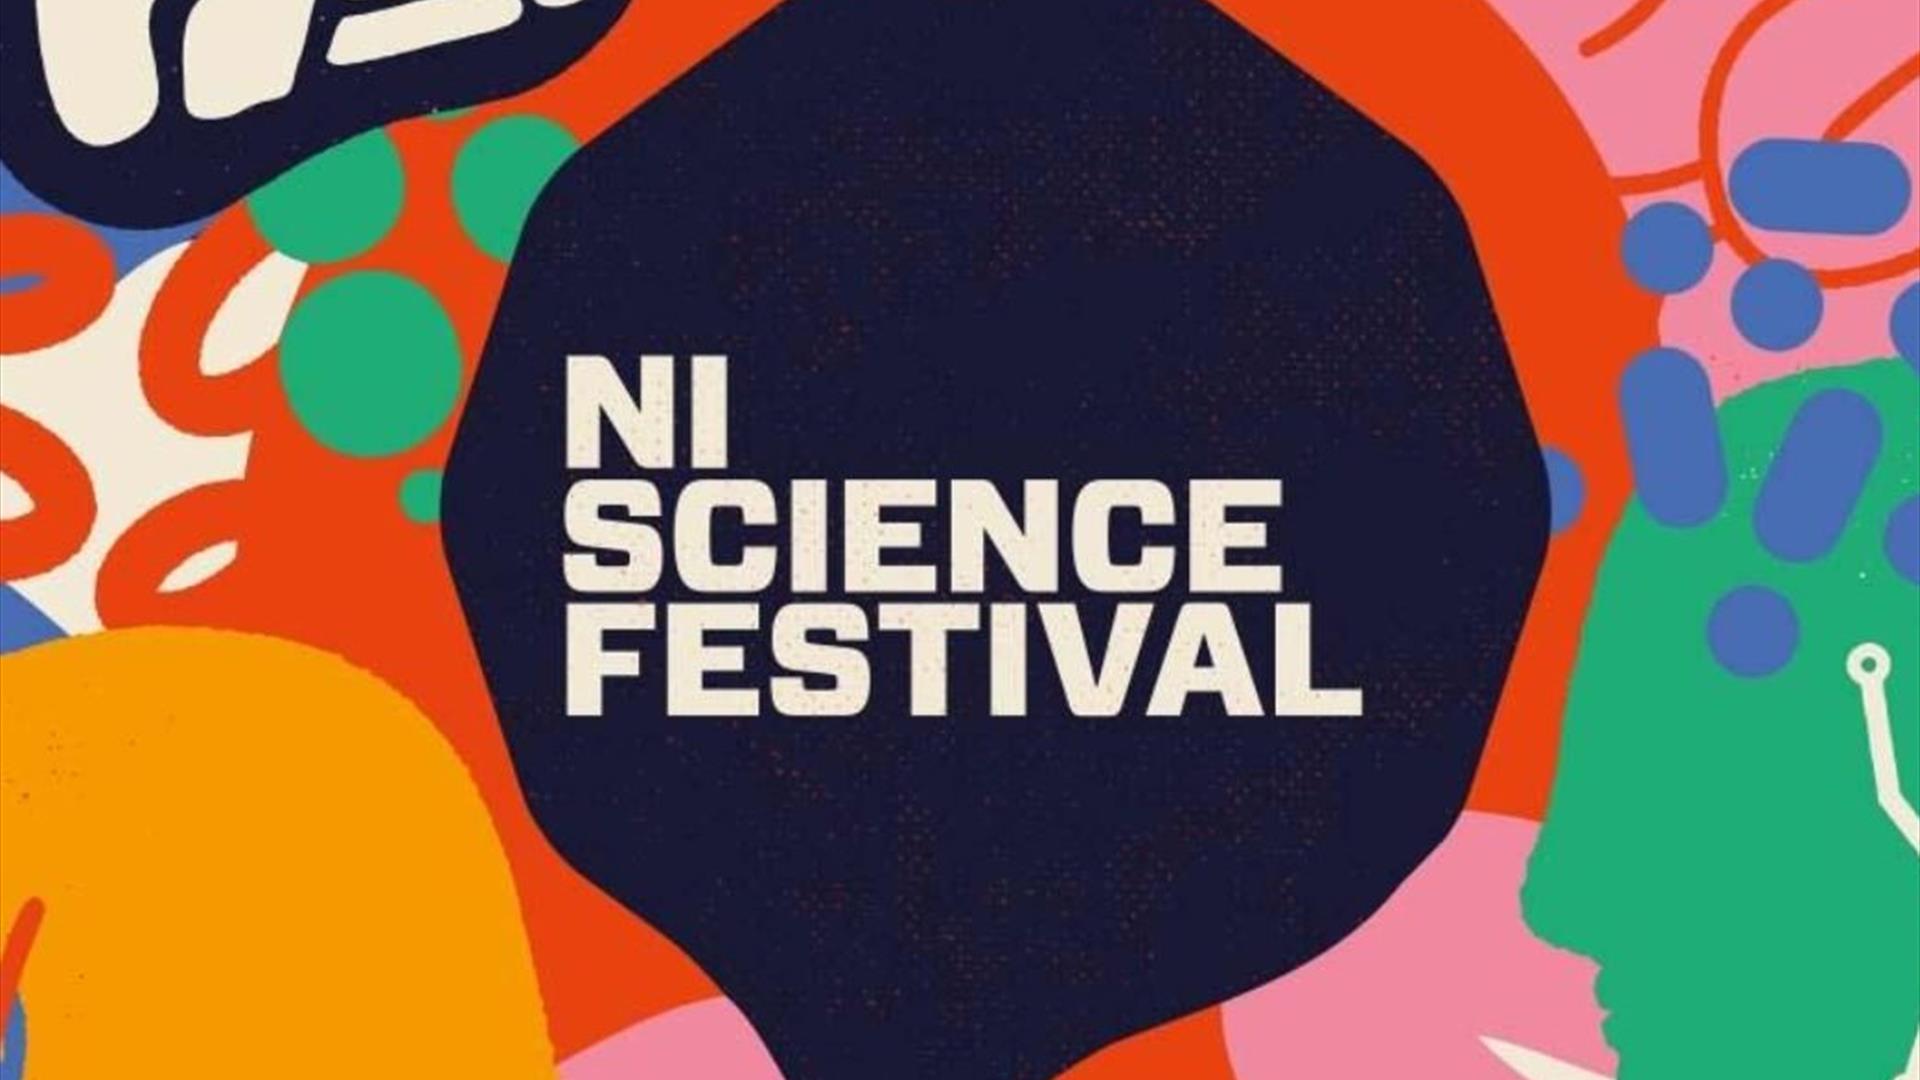 colourful image with black circle with writing saying "NI Science Festival"